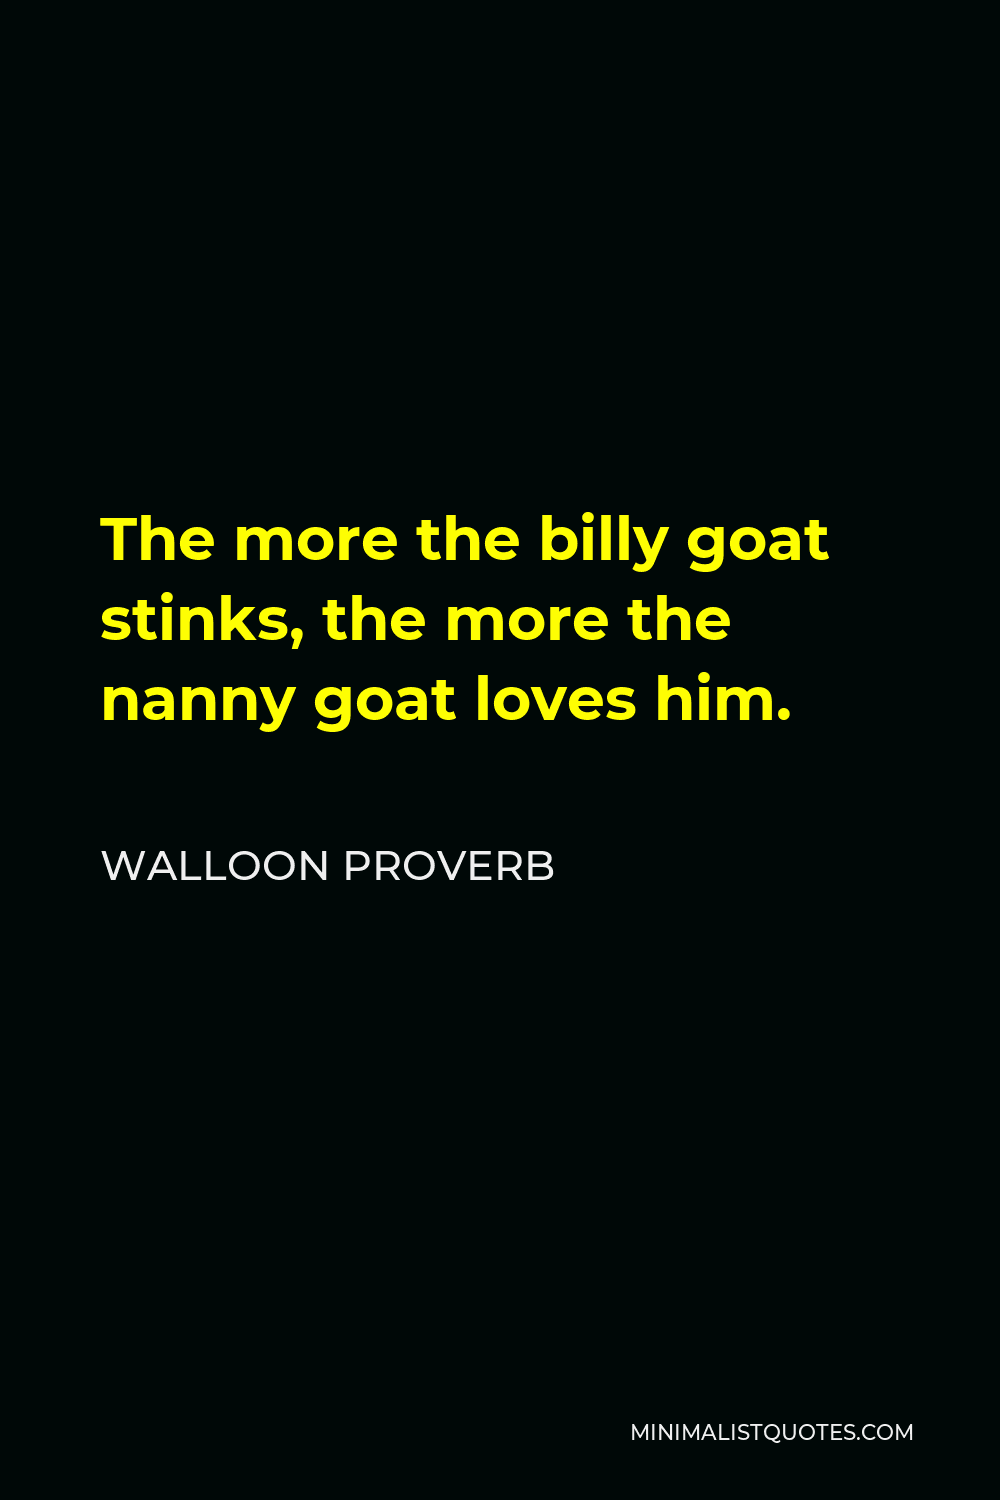 Walloon Proverb Quote - The more the billy goat stinks, the more the nanny goat loves him.